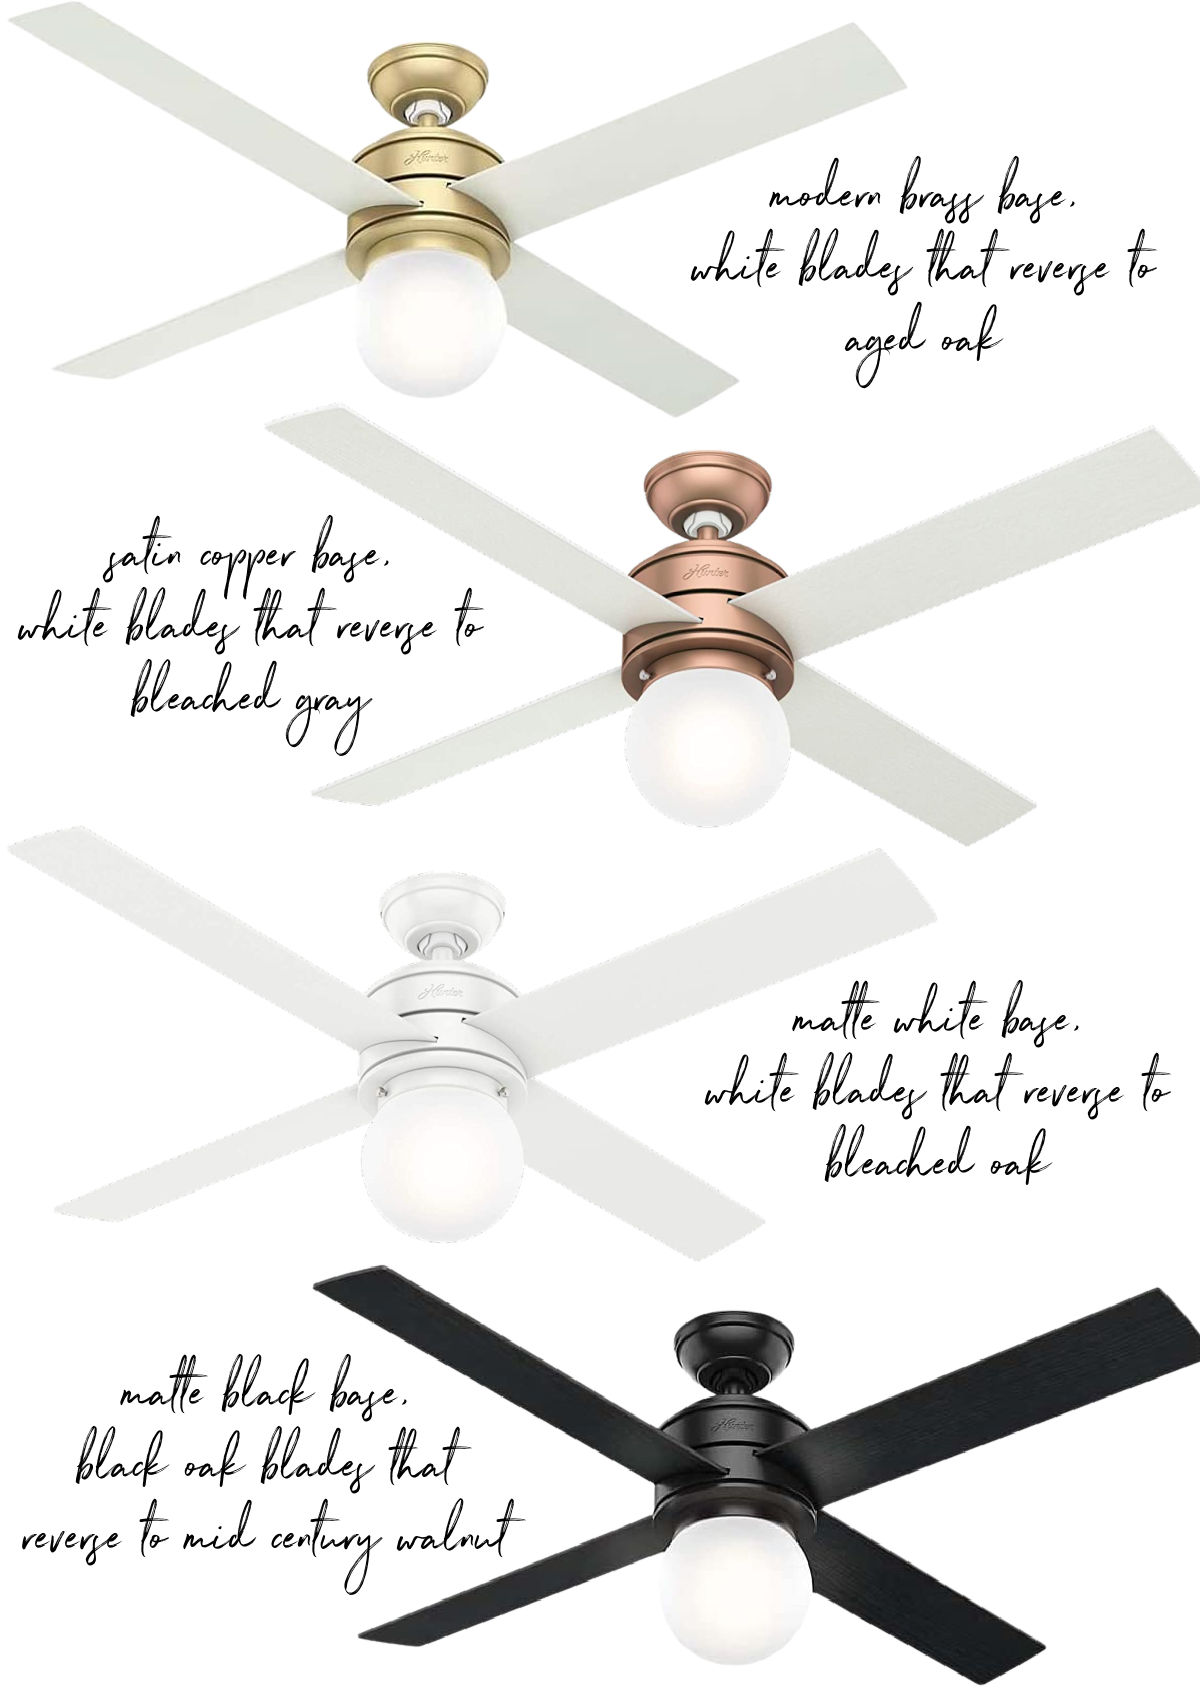 Gorgeous bedroom ceiling fans with globe lights